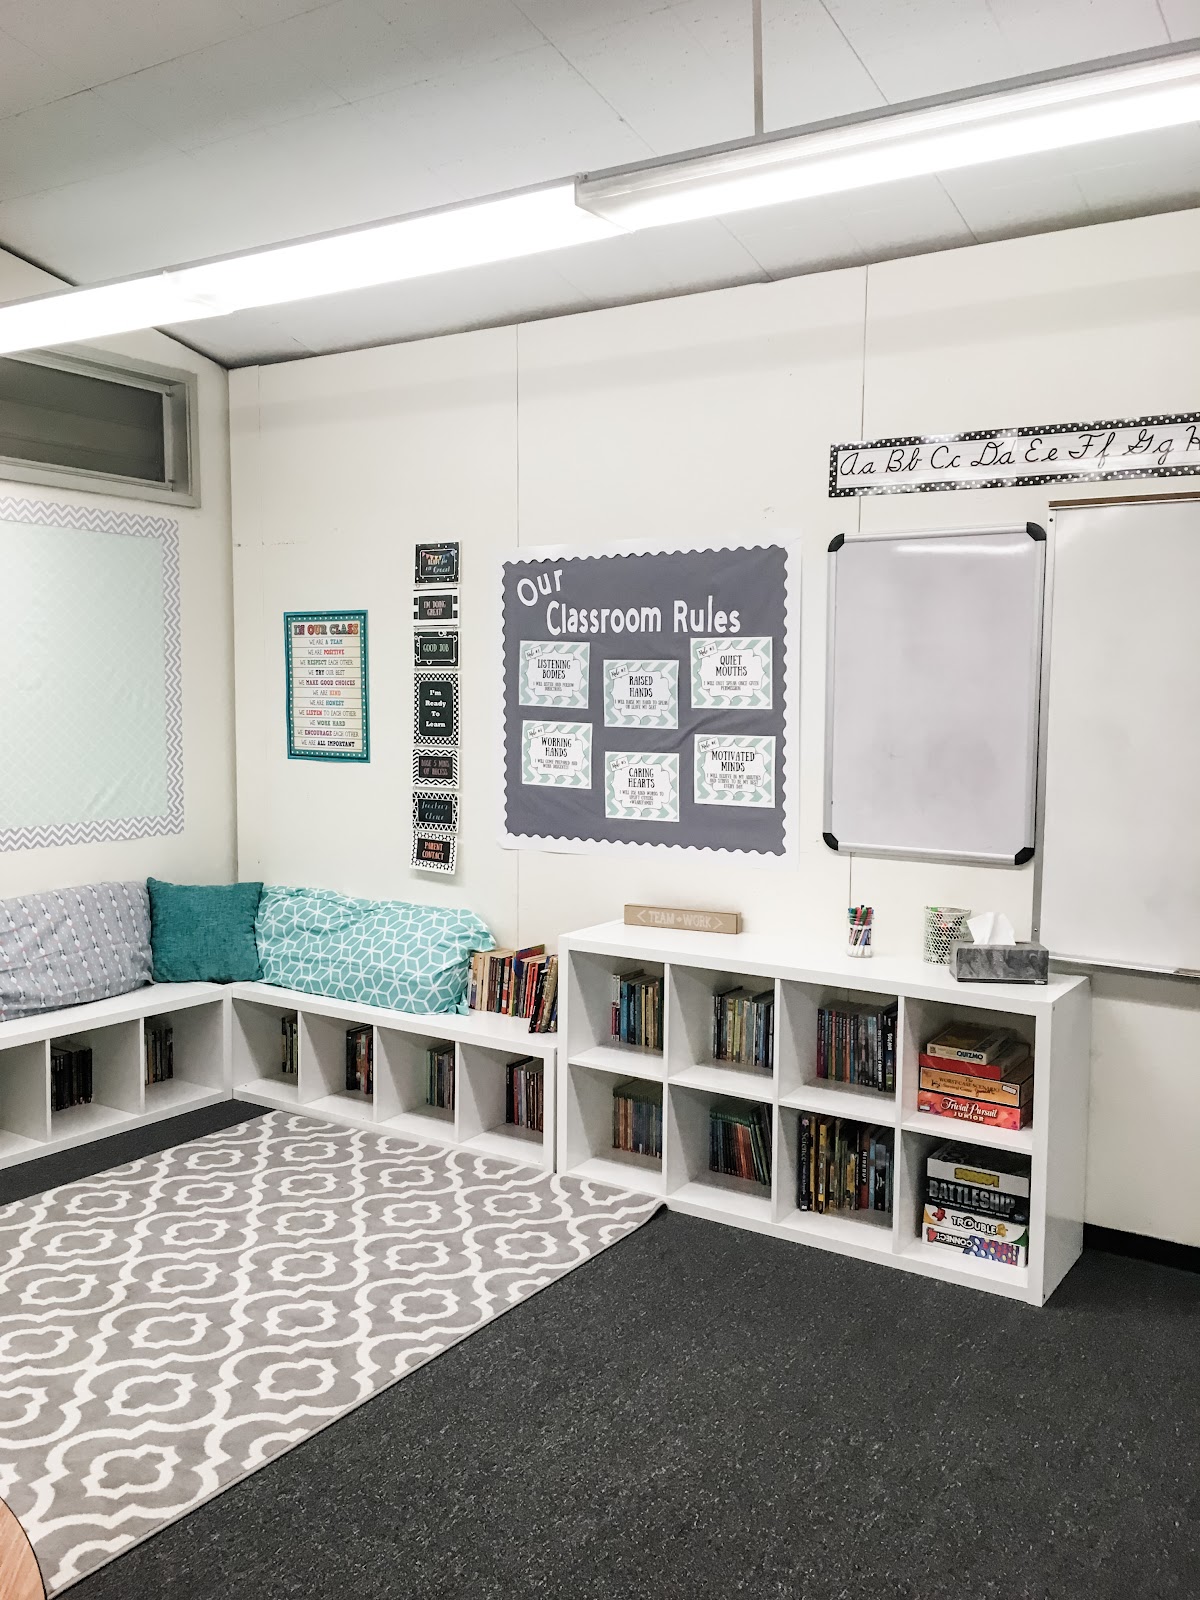 This image shows a classroom library with low bookshelves and pillows. 